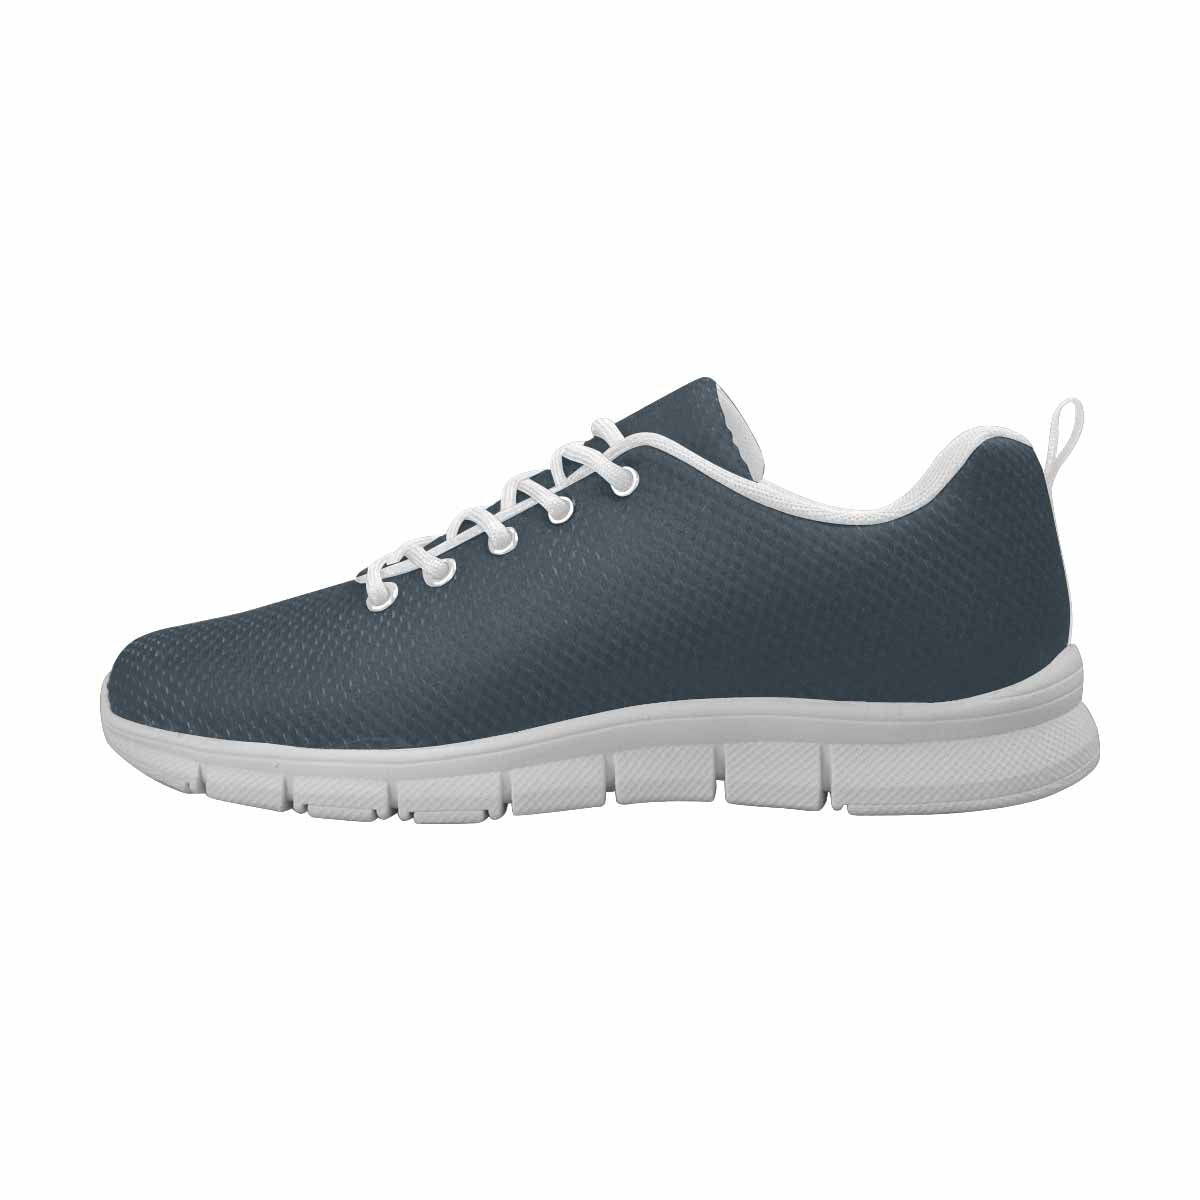 Sneakers For Men,    Charcoal Black   - Running Shoes